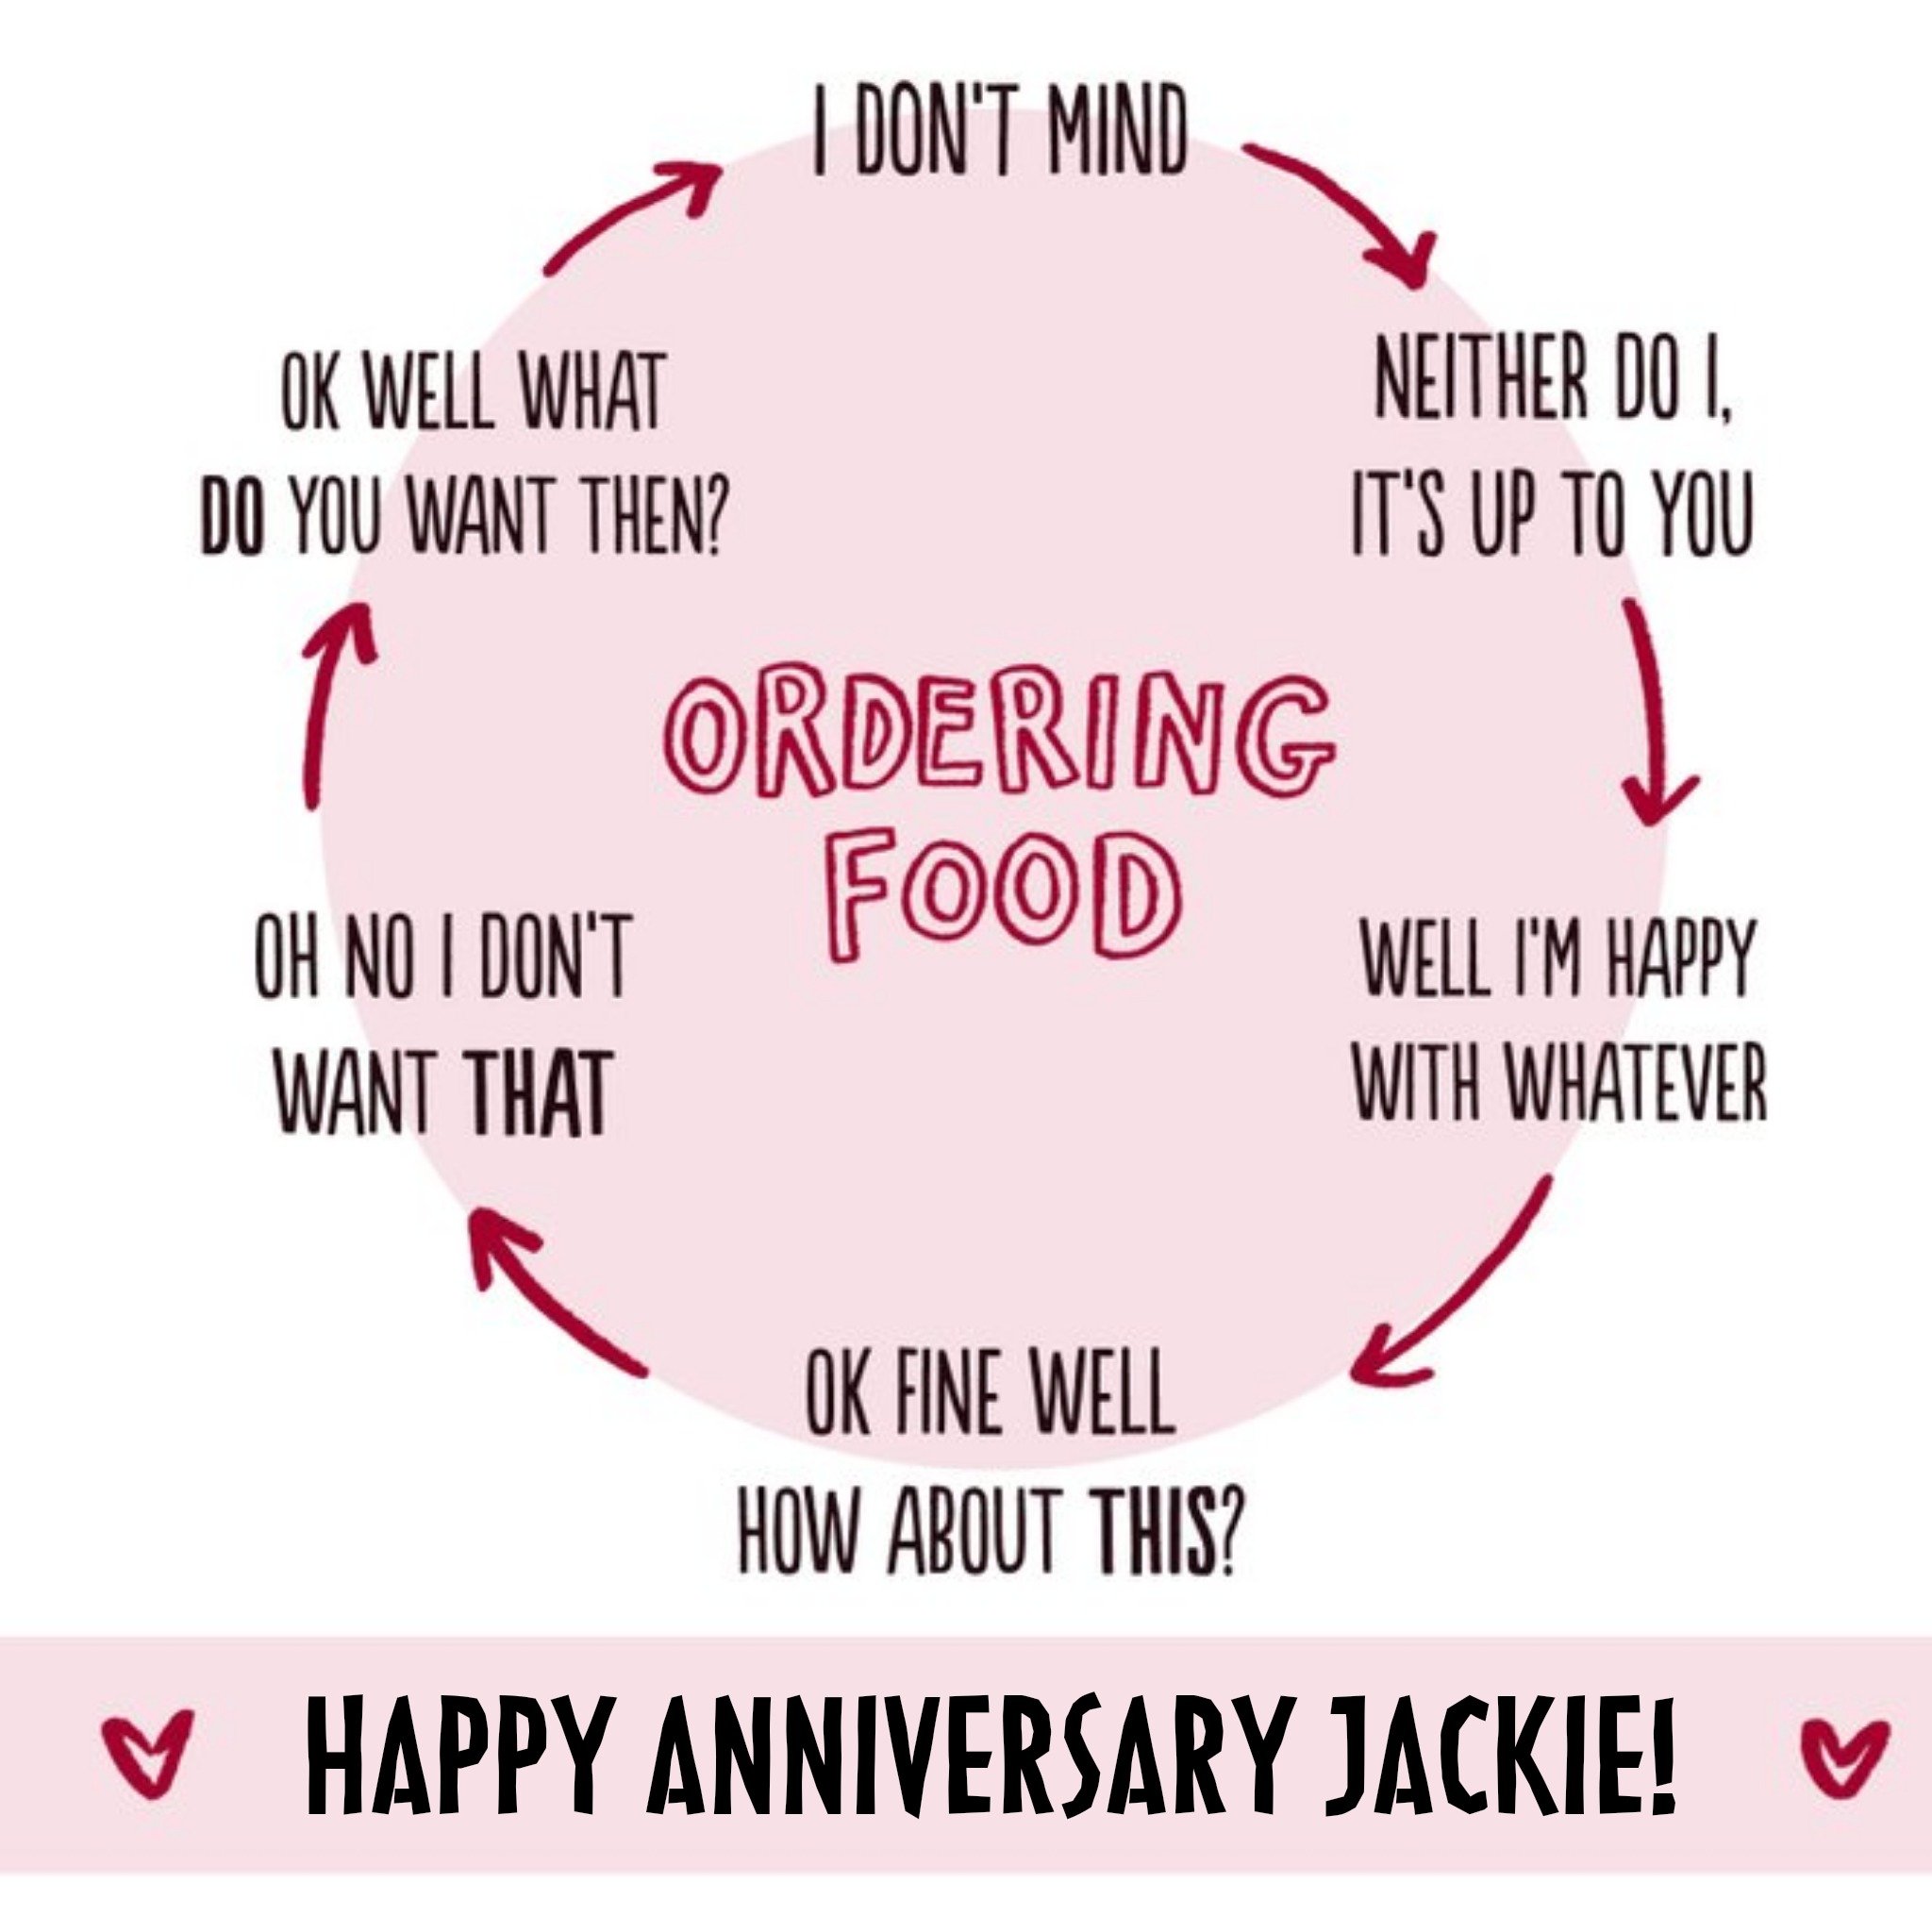 Moonpig Funny Flow Diagram About Ordering Food With Your Partner Anniversary Card, Large